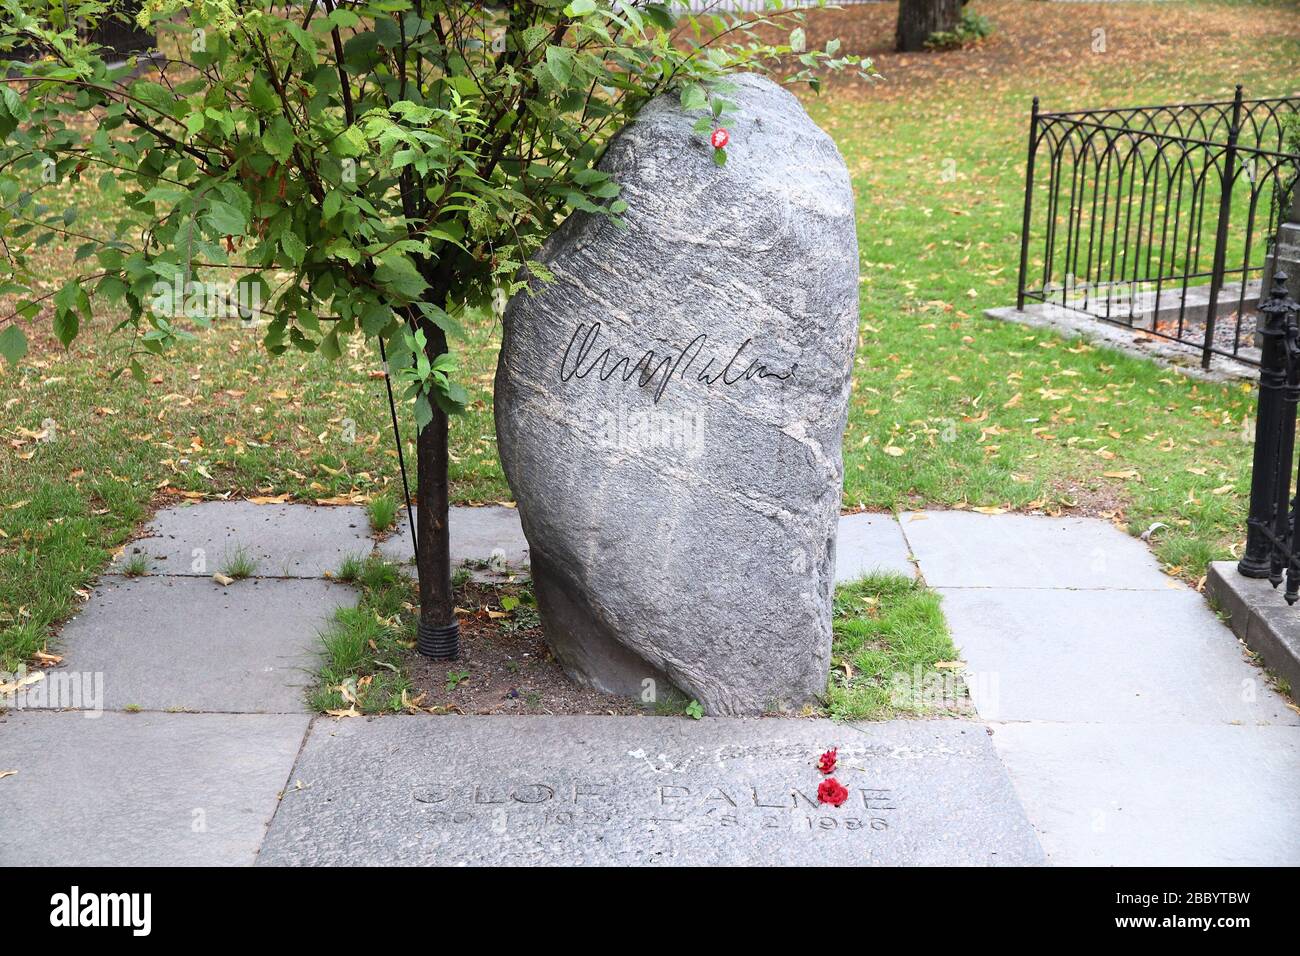 STOCKHOLM, SWEDEN - AUGUST 22, 2018: Grave of Olof Palme, assassinated Prime Minister of Sweden in Stockholm. The mystery remains unsolved. Stock Photo